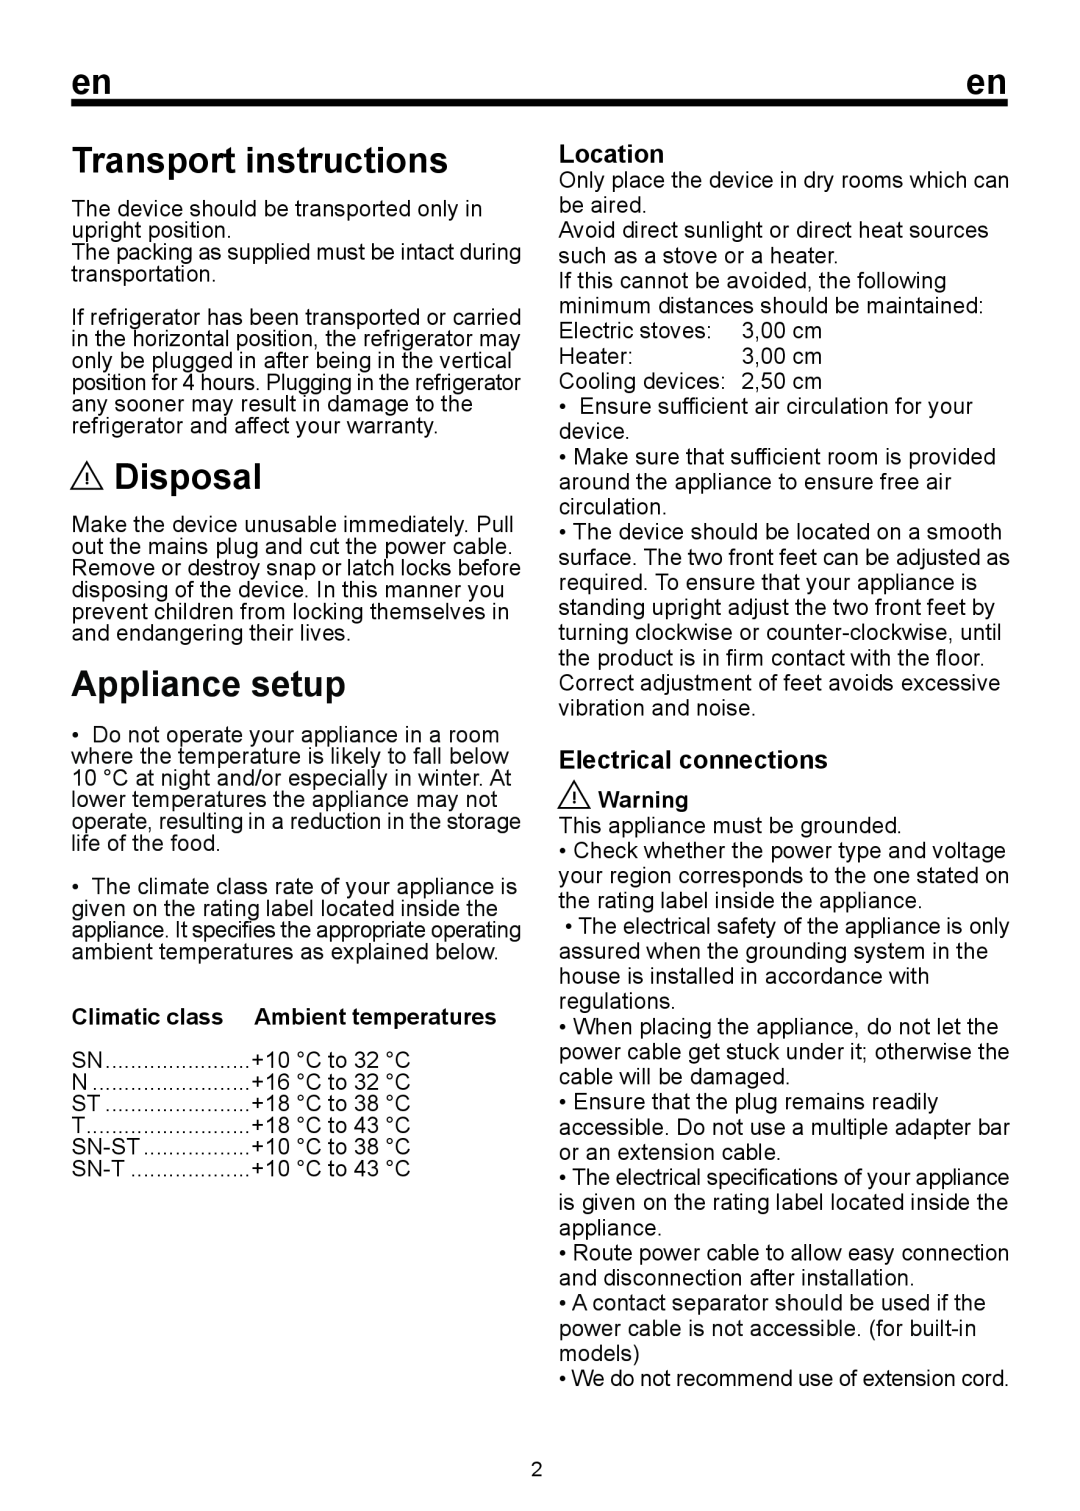 Blomberg BRFBT 0900 Transport instructions, Disposal, Appliance setup, Location, Electrical connections, Climatic class 